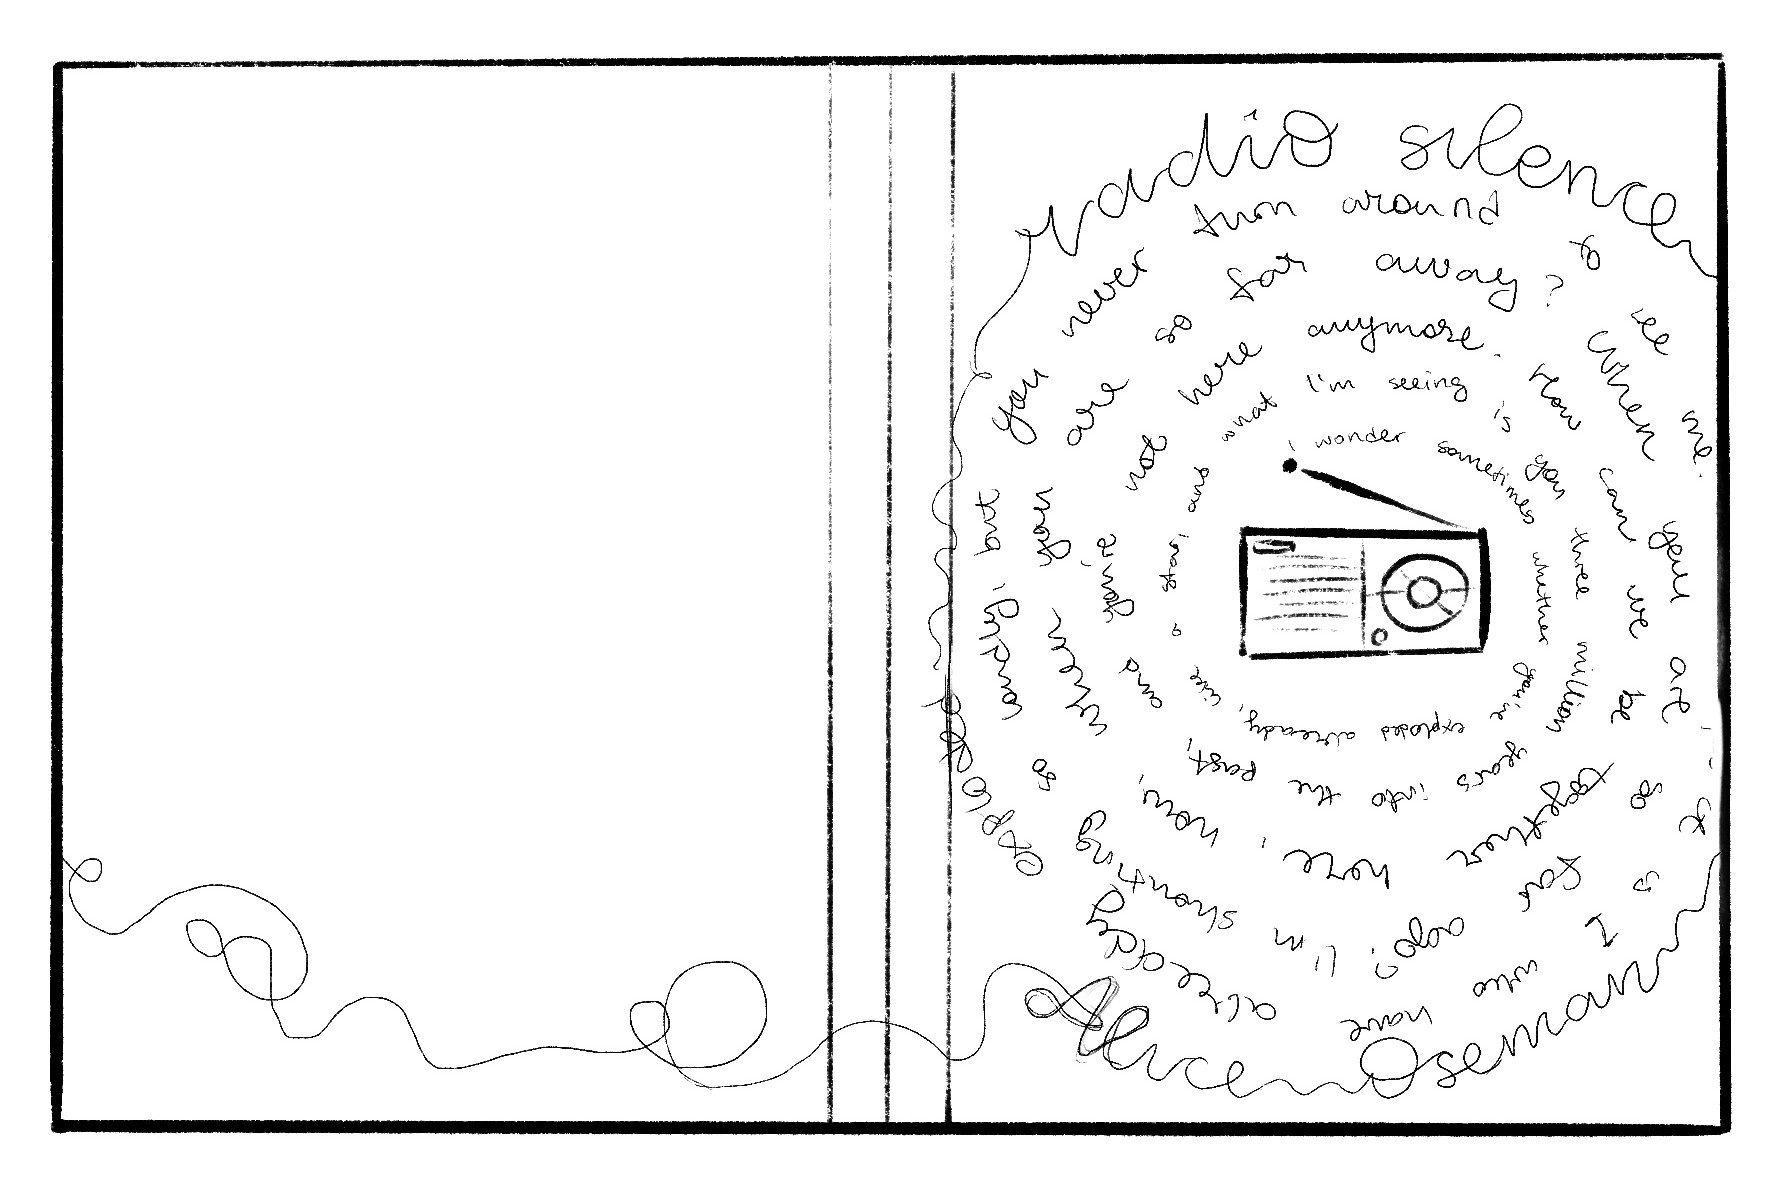 Radio Silence jacket sketch. There is a radio at the center, with words in cursive coming out of the antenna and swirling in a spiral around the radio.